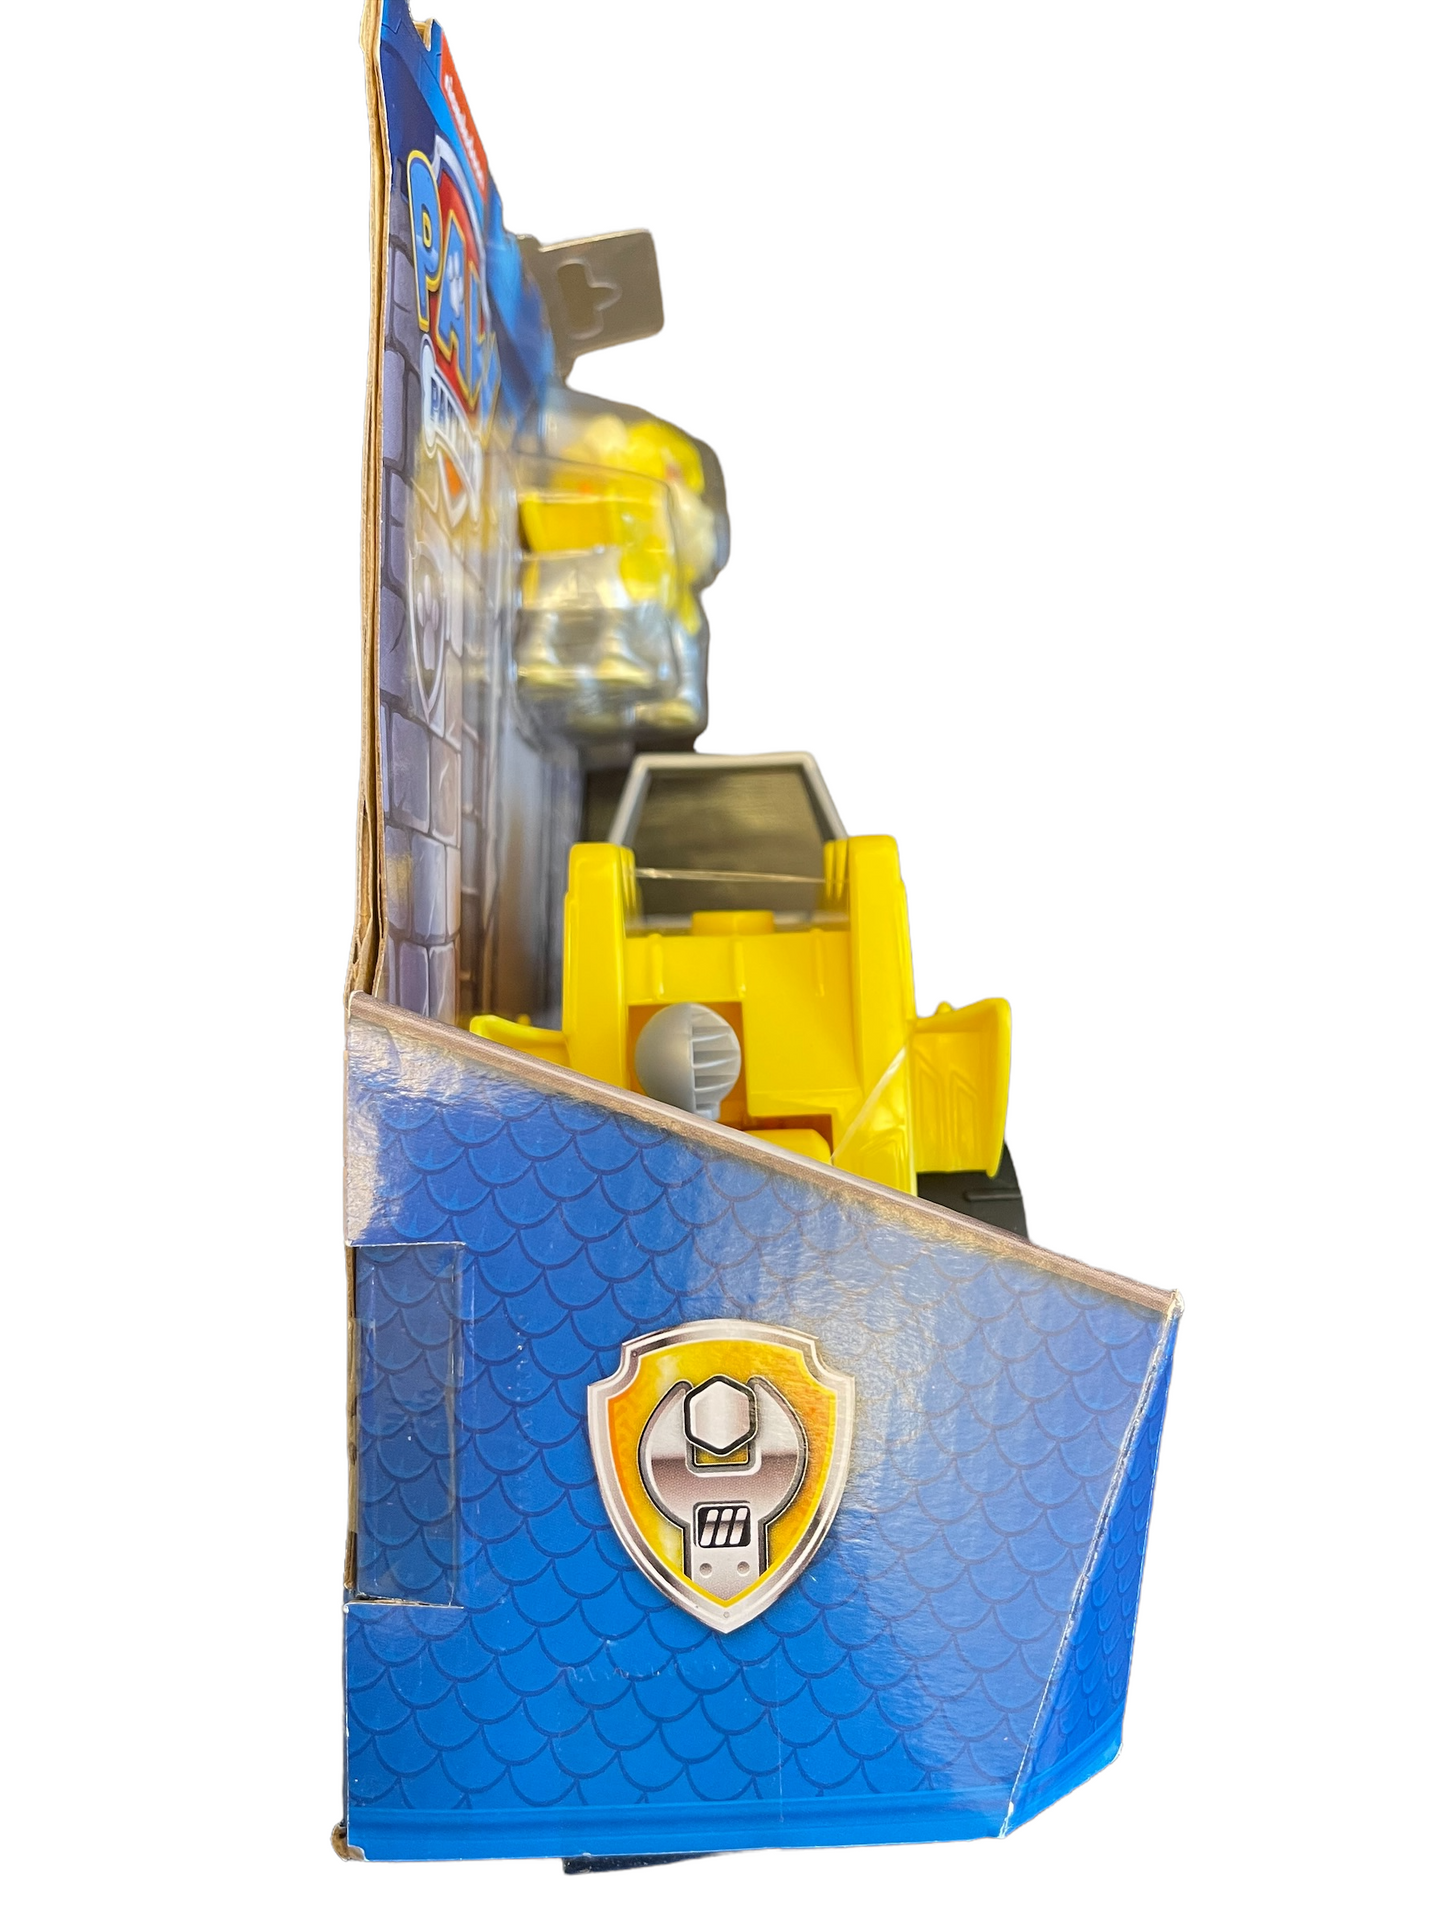 Paw Patrol Rescue Knights Rubble